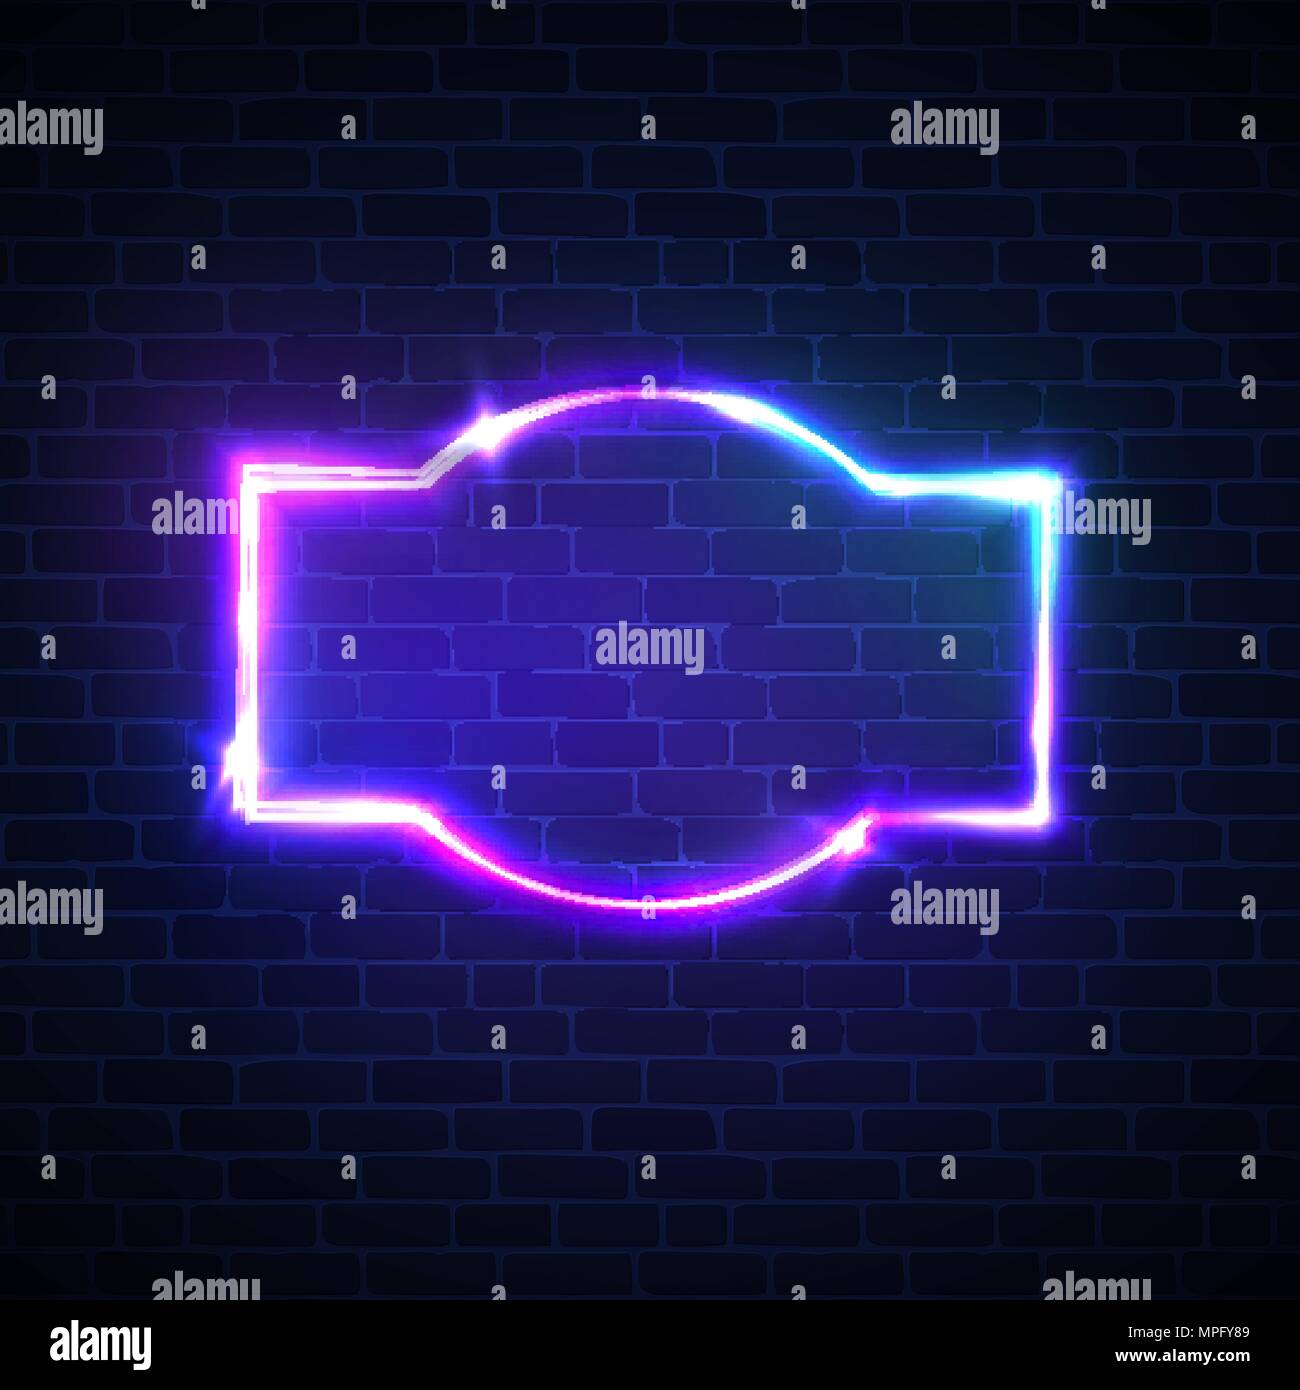 Disco show advertising street signage with glowing on brick texture. Night club neon sign on brick wall background. Blank 3d retro frame with shining neon lights. Color vector illustration in 80 style Stock Vector